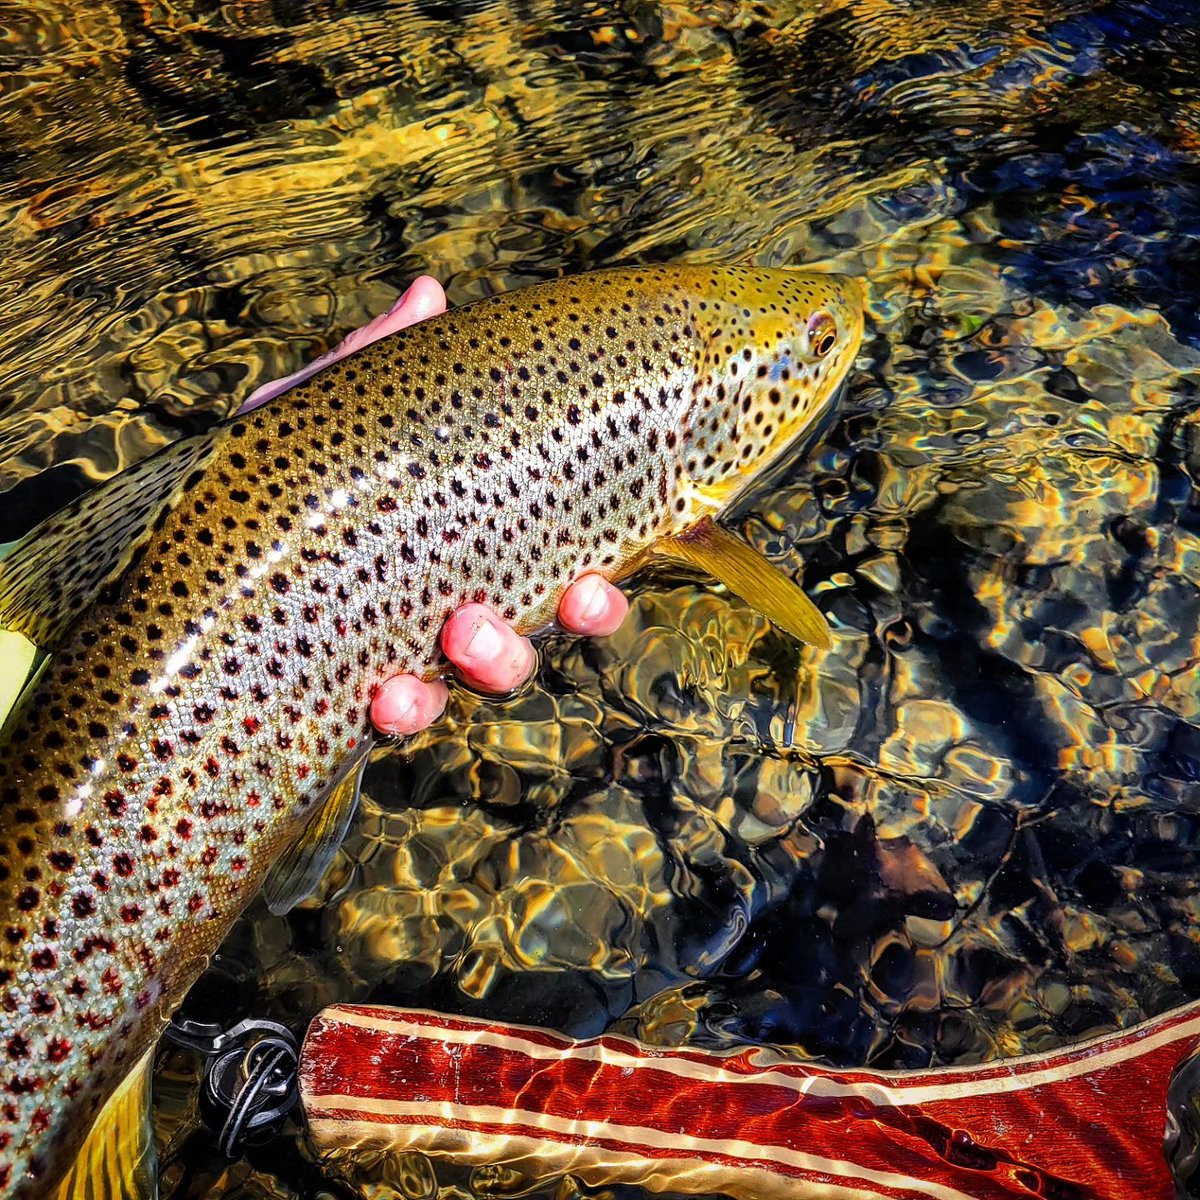 'Bad news was, it didn't fit in the net. The good news... it didn't fit in the net. Golden stone euro was all over it as usual.' // image by Gary Morin @adkflytying ⁠• •⁠ •⁠ •⁠ #trout #troutbum #flyfishingaddict #flyfishingadventures #flyfishing